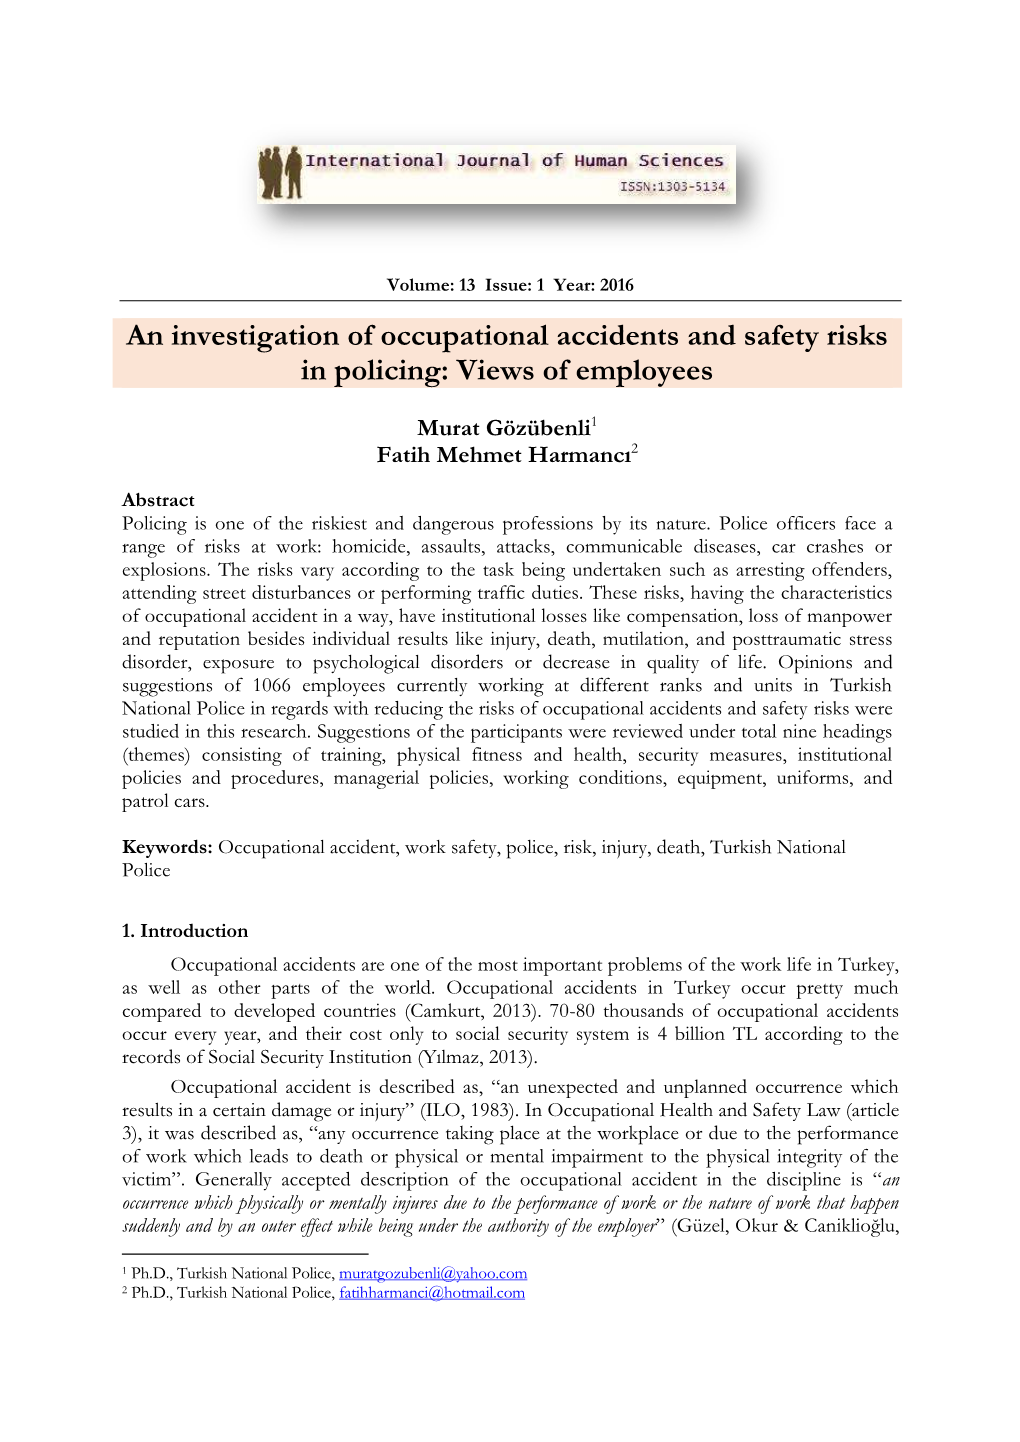 An Investigation of Occupational Accidents and Safety Risks in Policing: Views of Employees